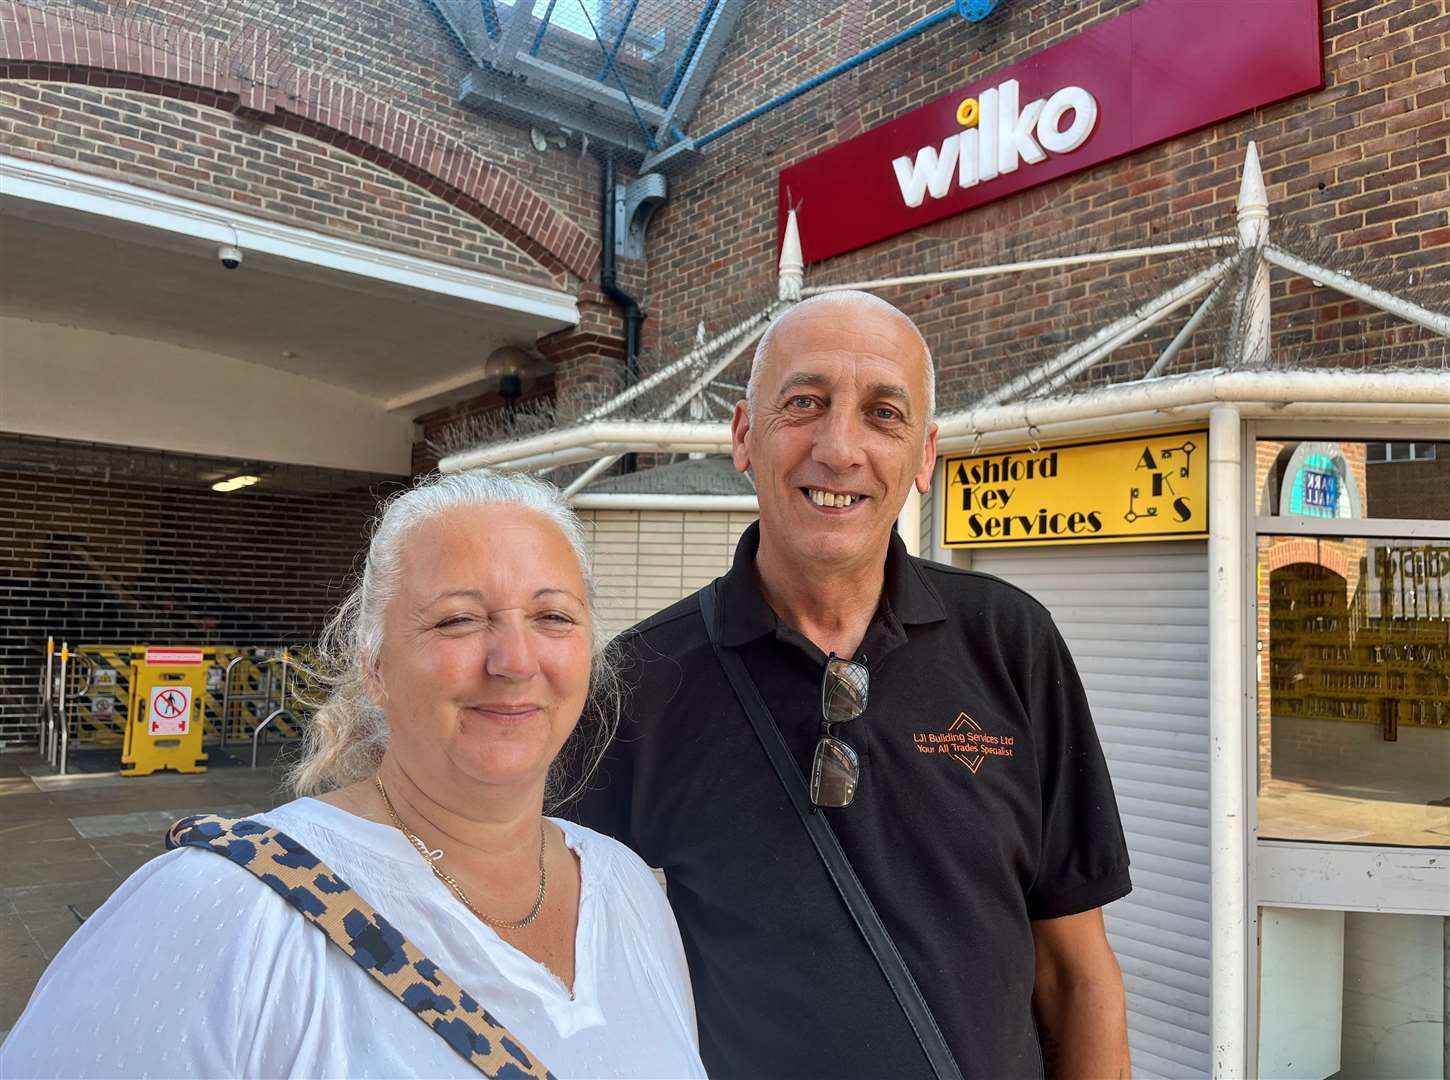 Claire and Dave Drummond say they fear more shops will close in Ashford following the loss of Wilko